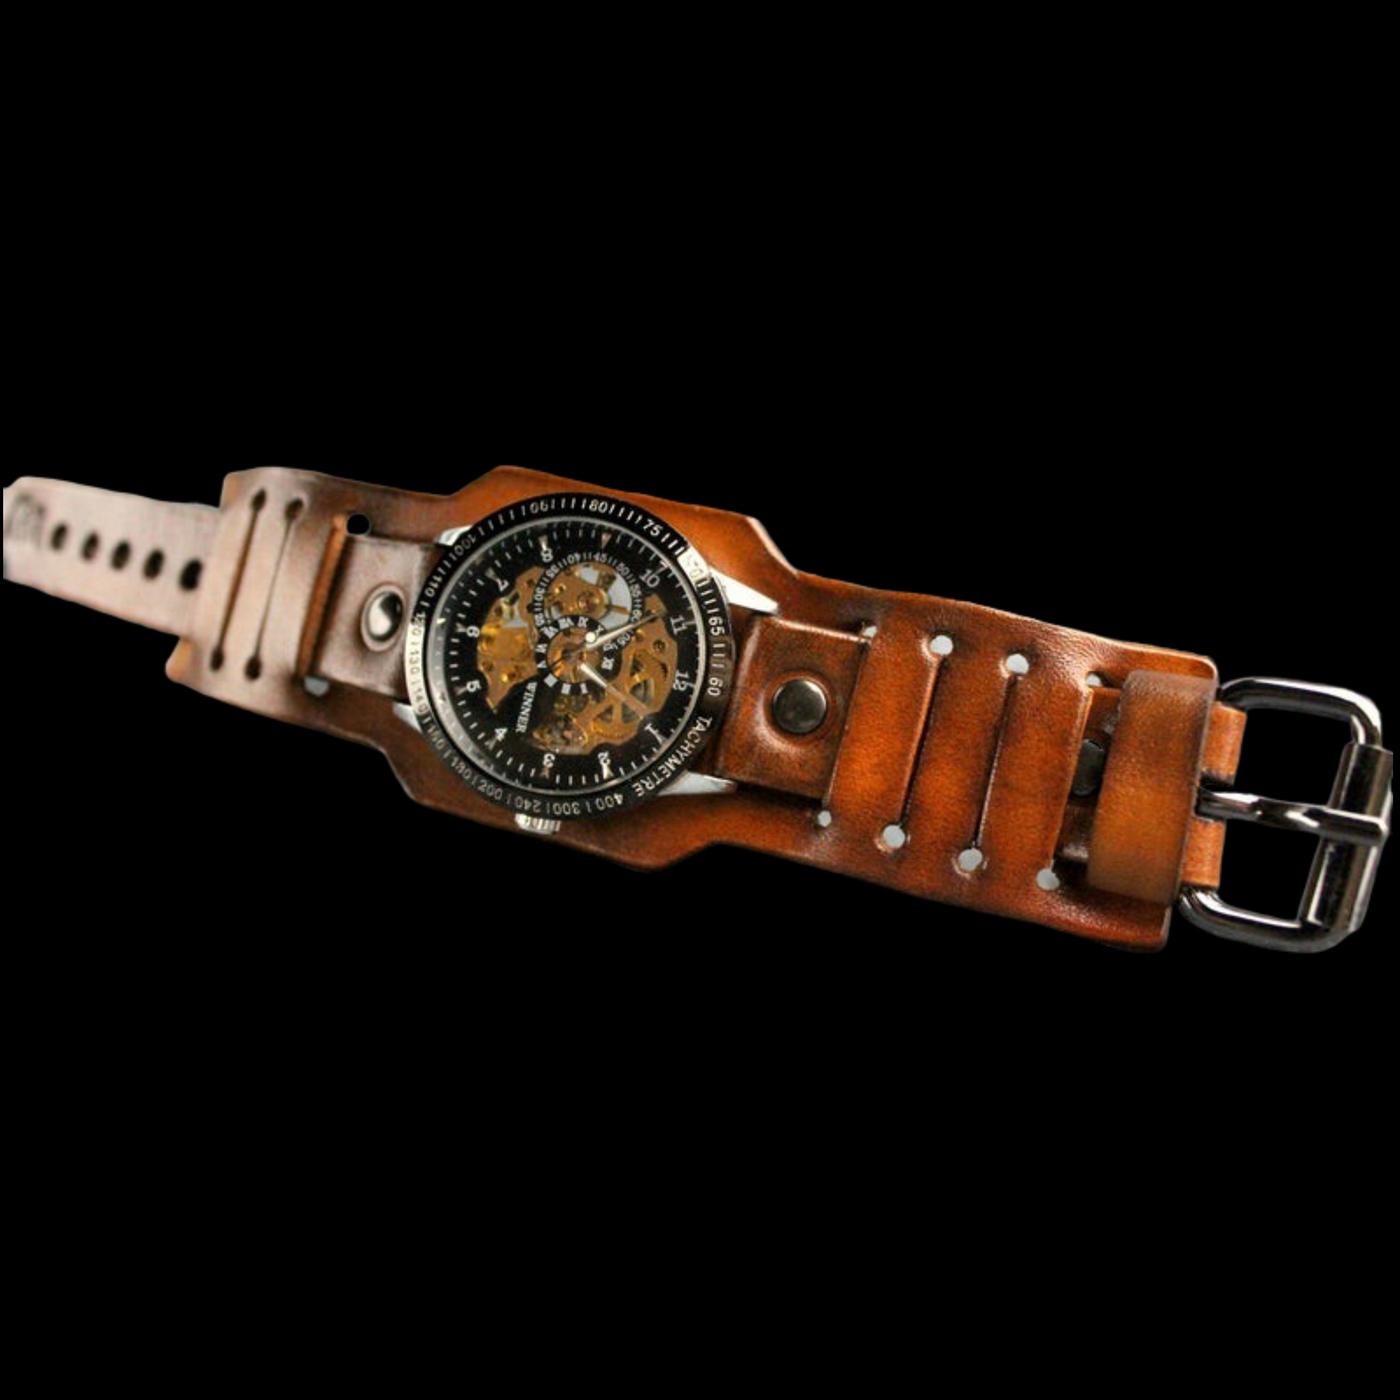 The Renegade Leather Cuff Watch